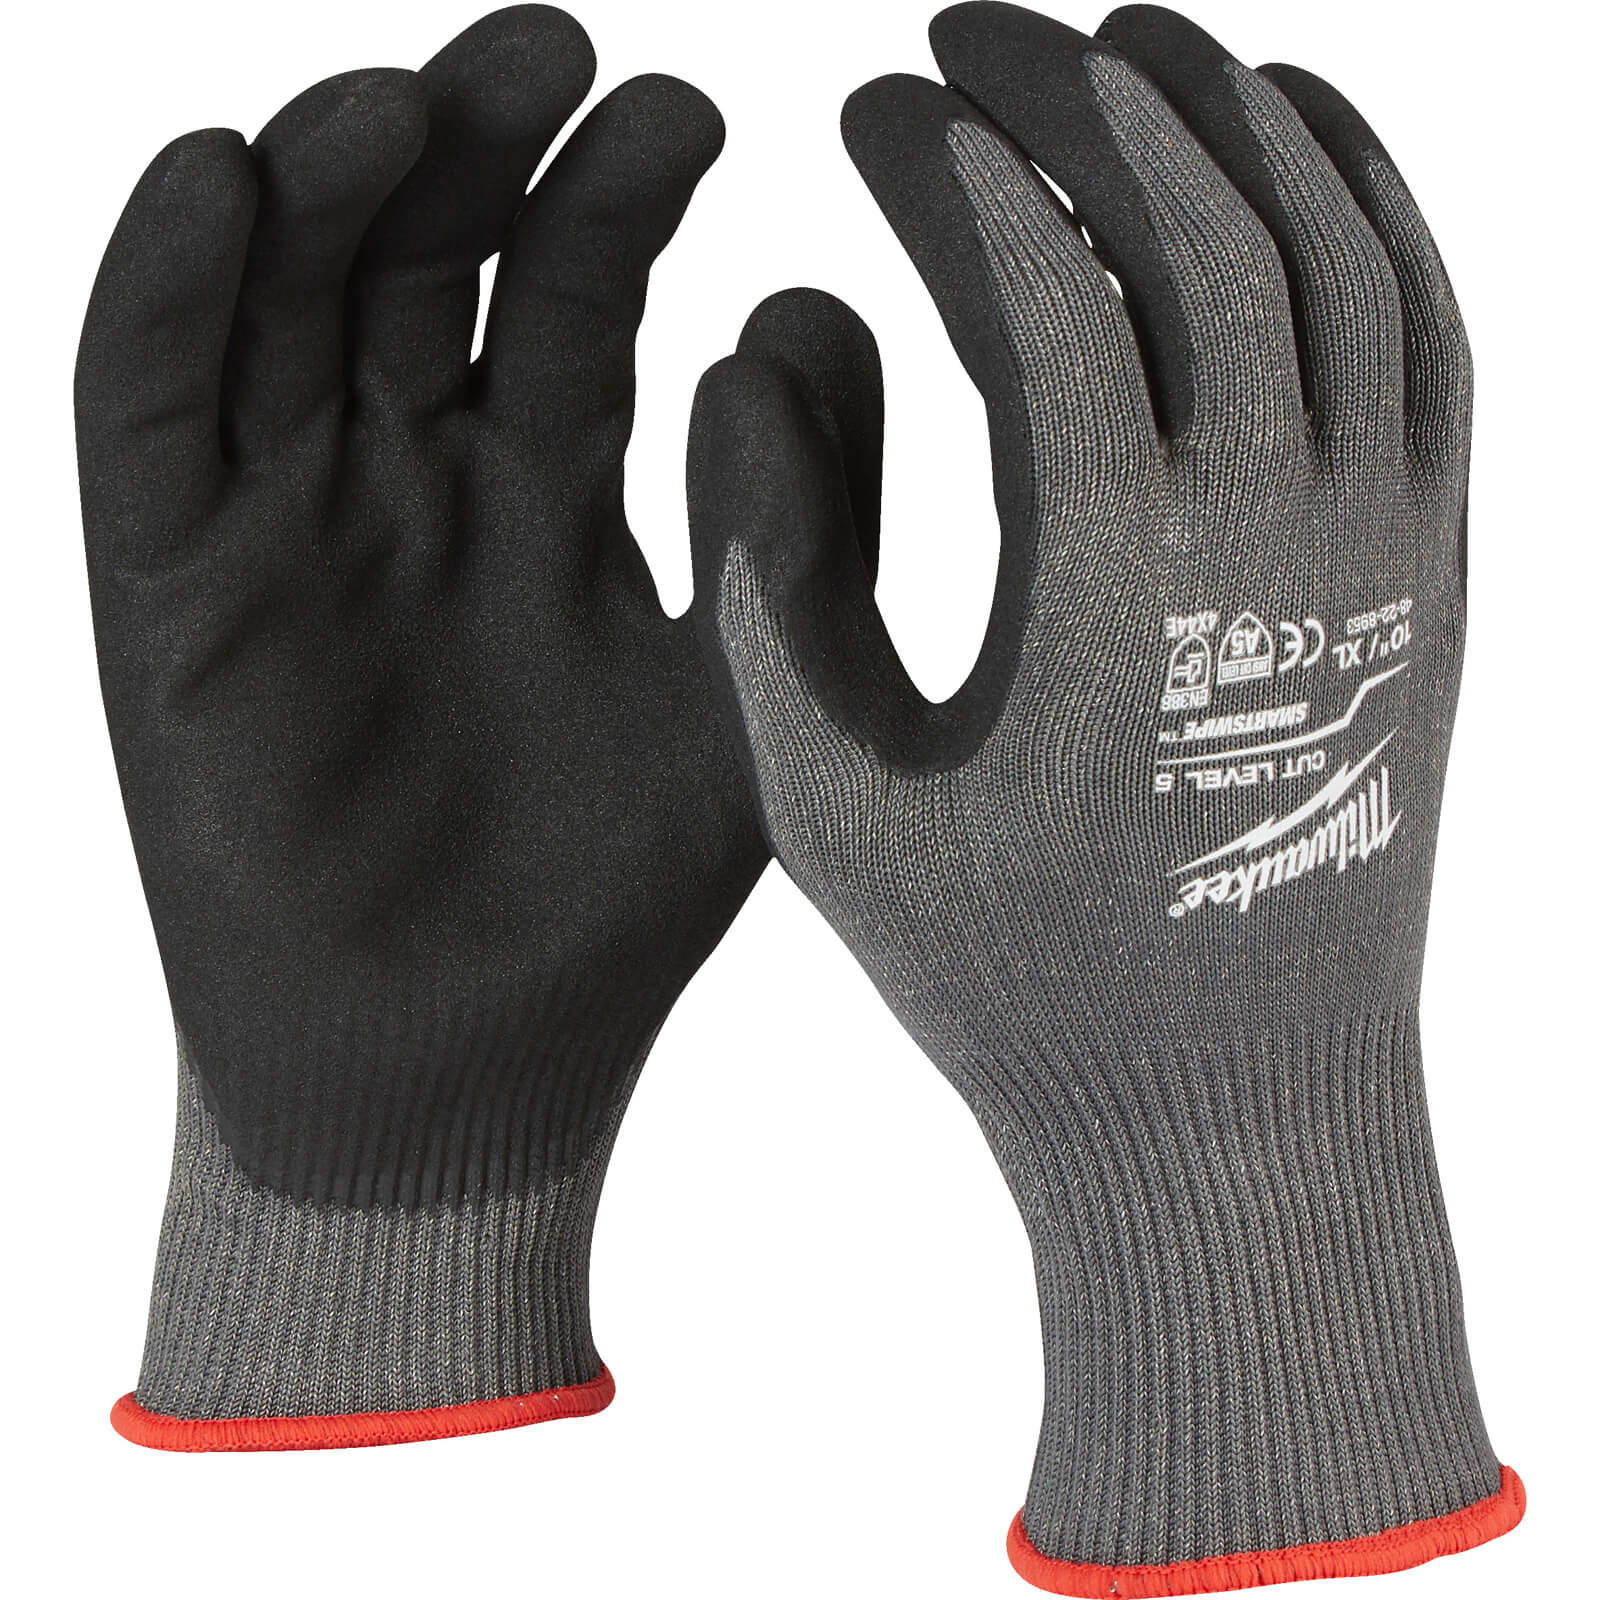 Image of Milwaukee Cut Level 5 Dipped Work Gloves Black / Grey 2XL Pack of 144